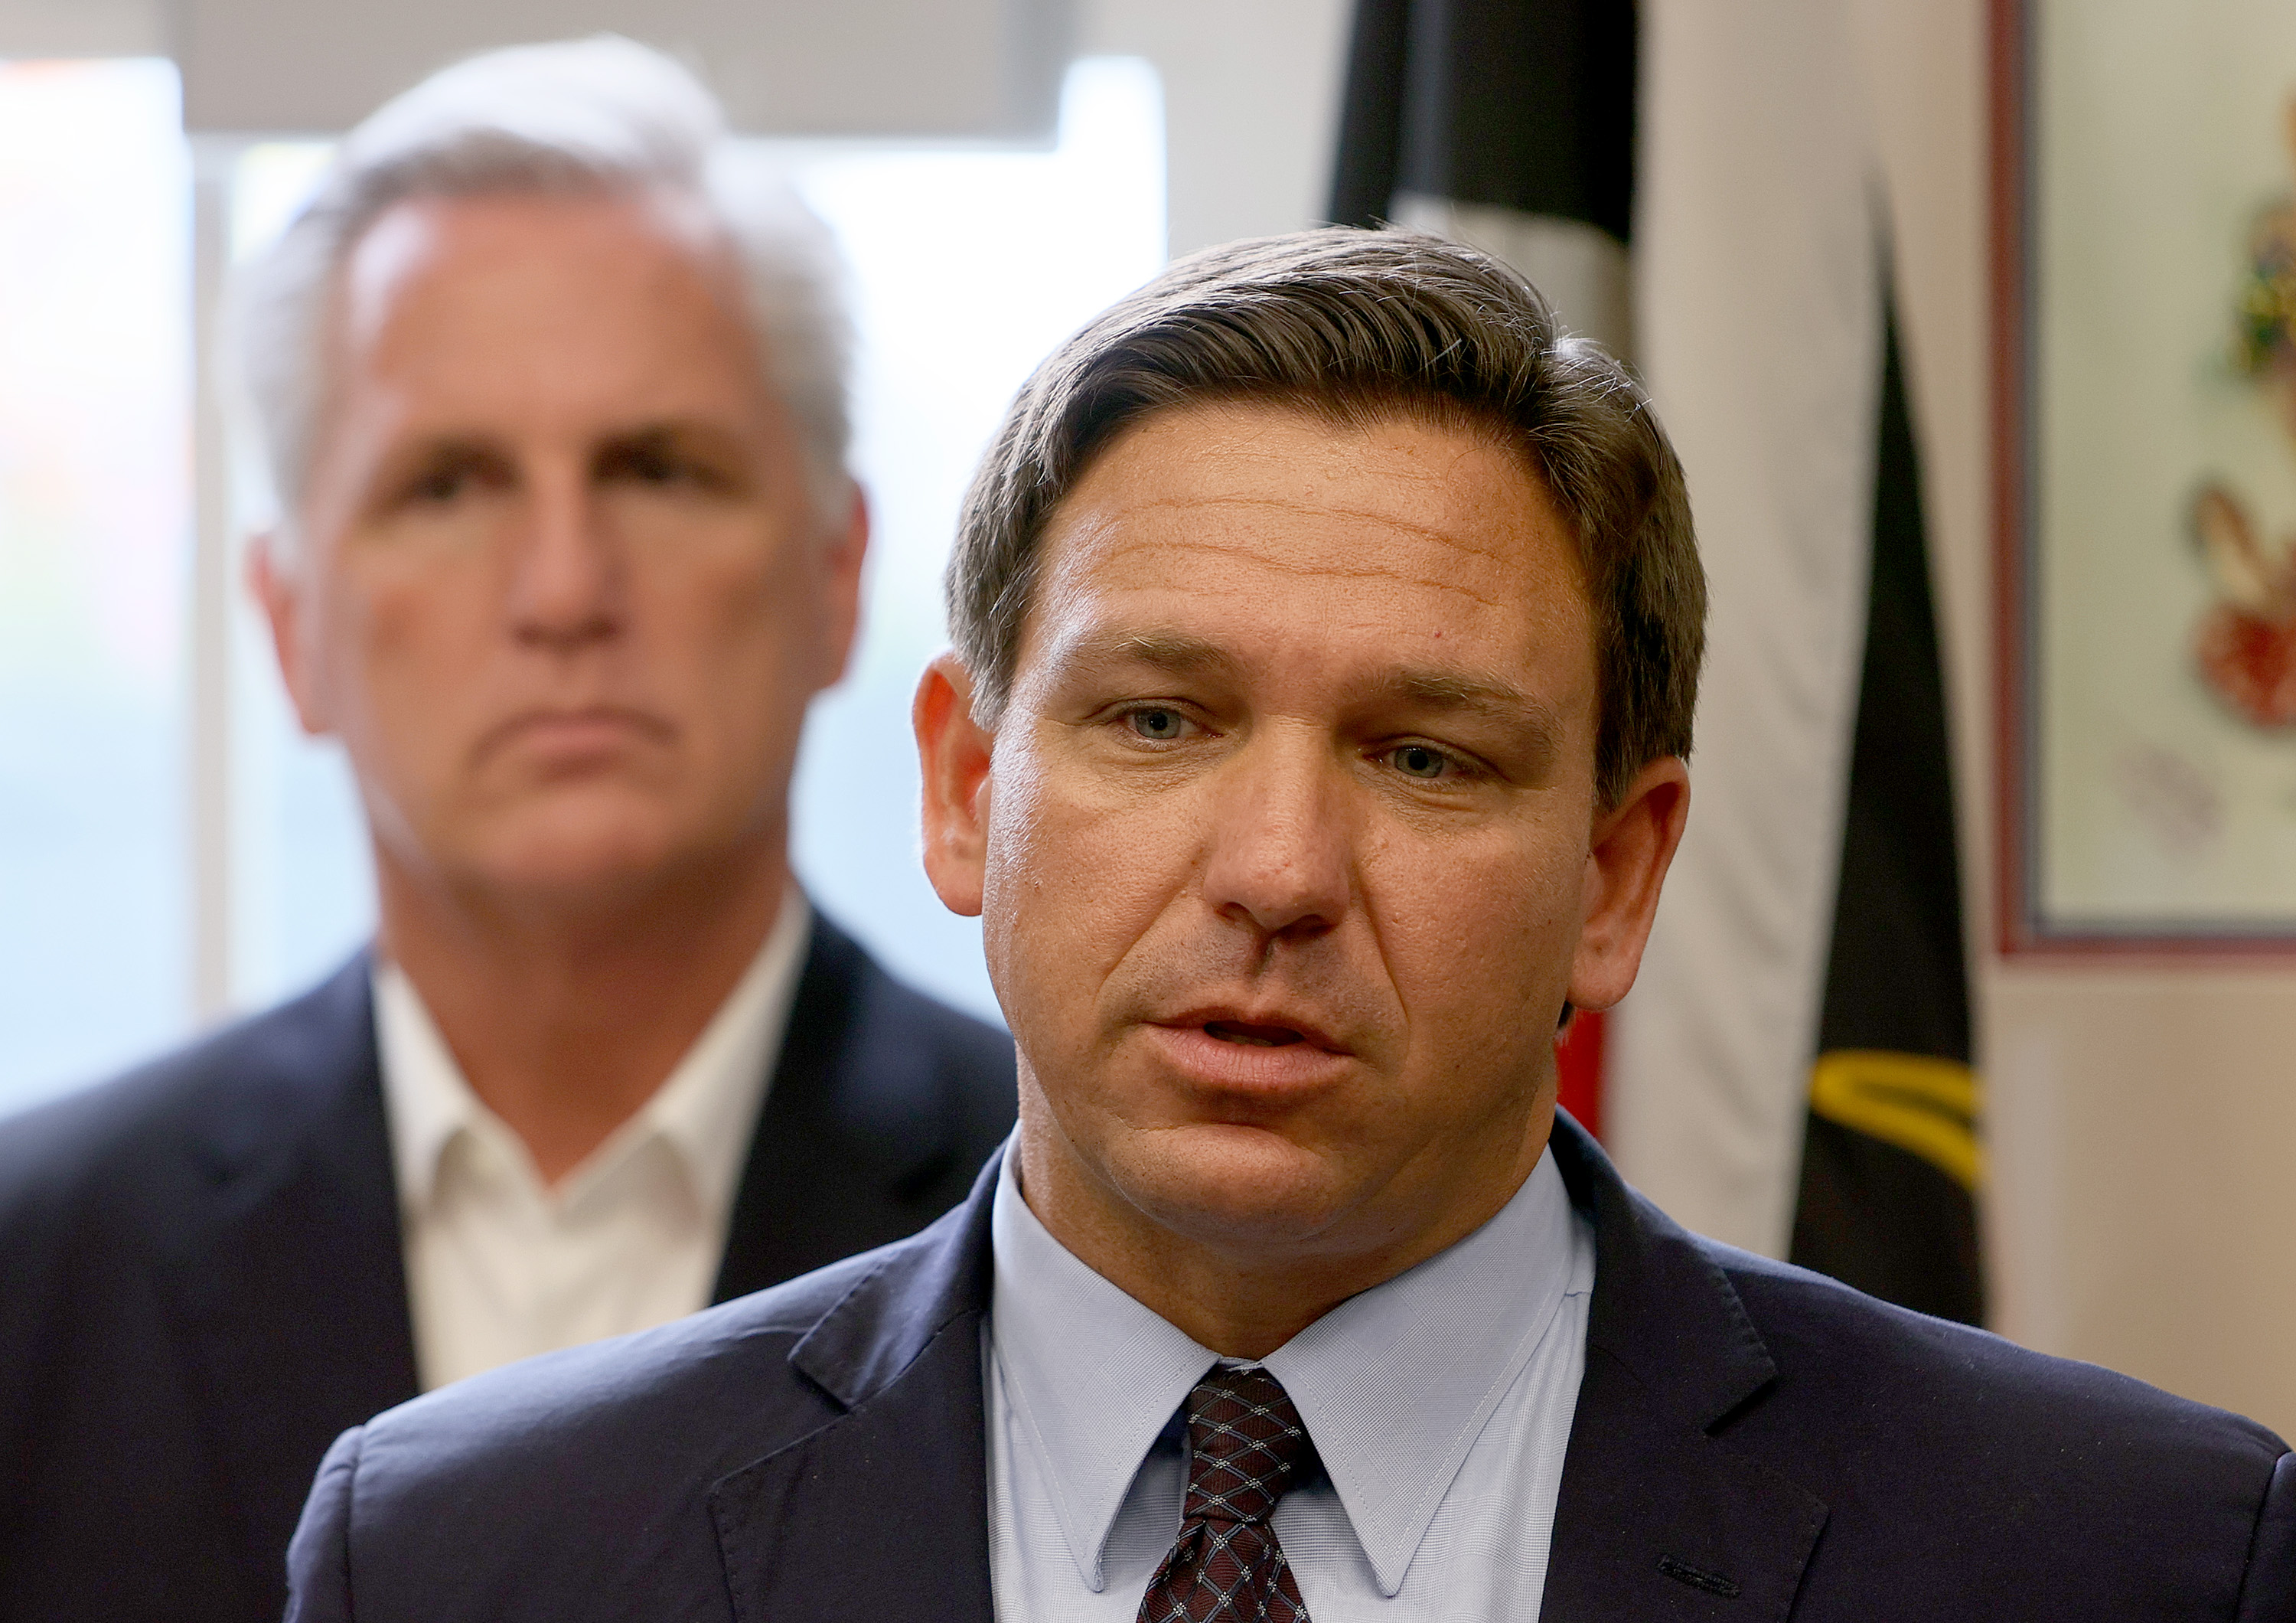 The Wrap: Is Ron DeSantis a member of Skull and Bones? Is he anti-vax? Is  Florida a low vax state?